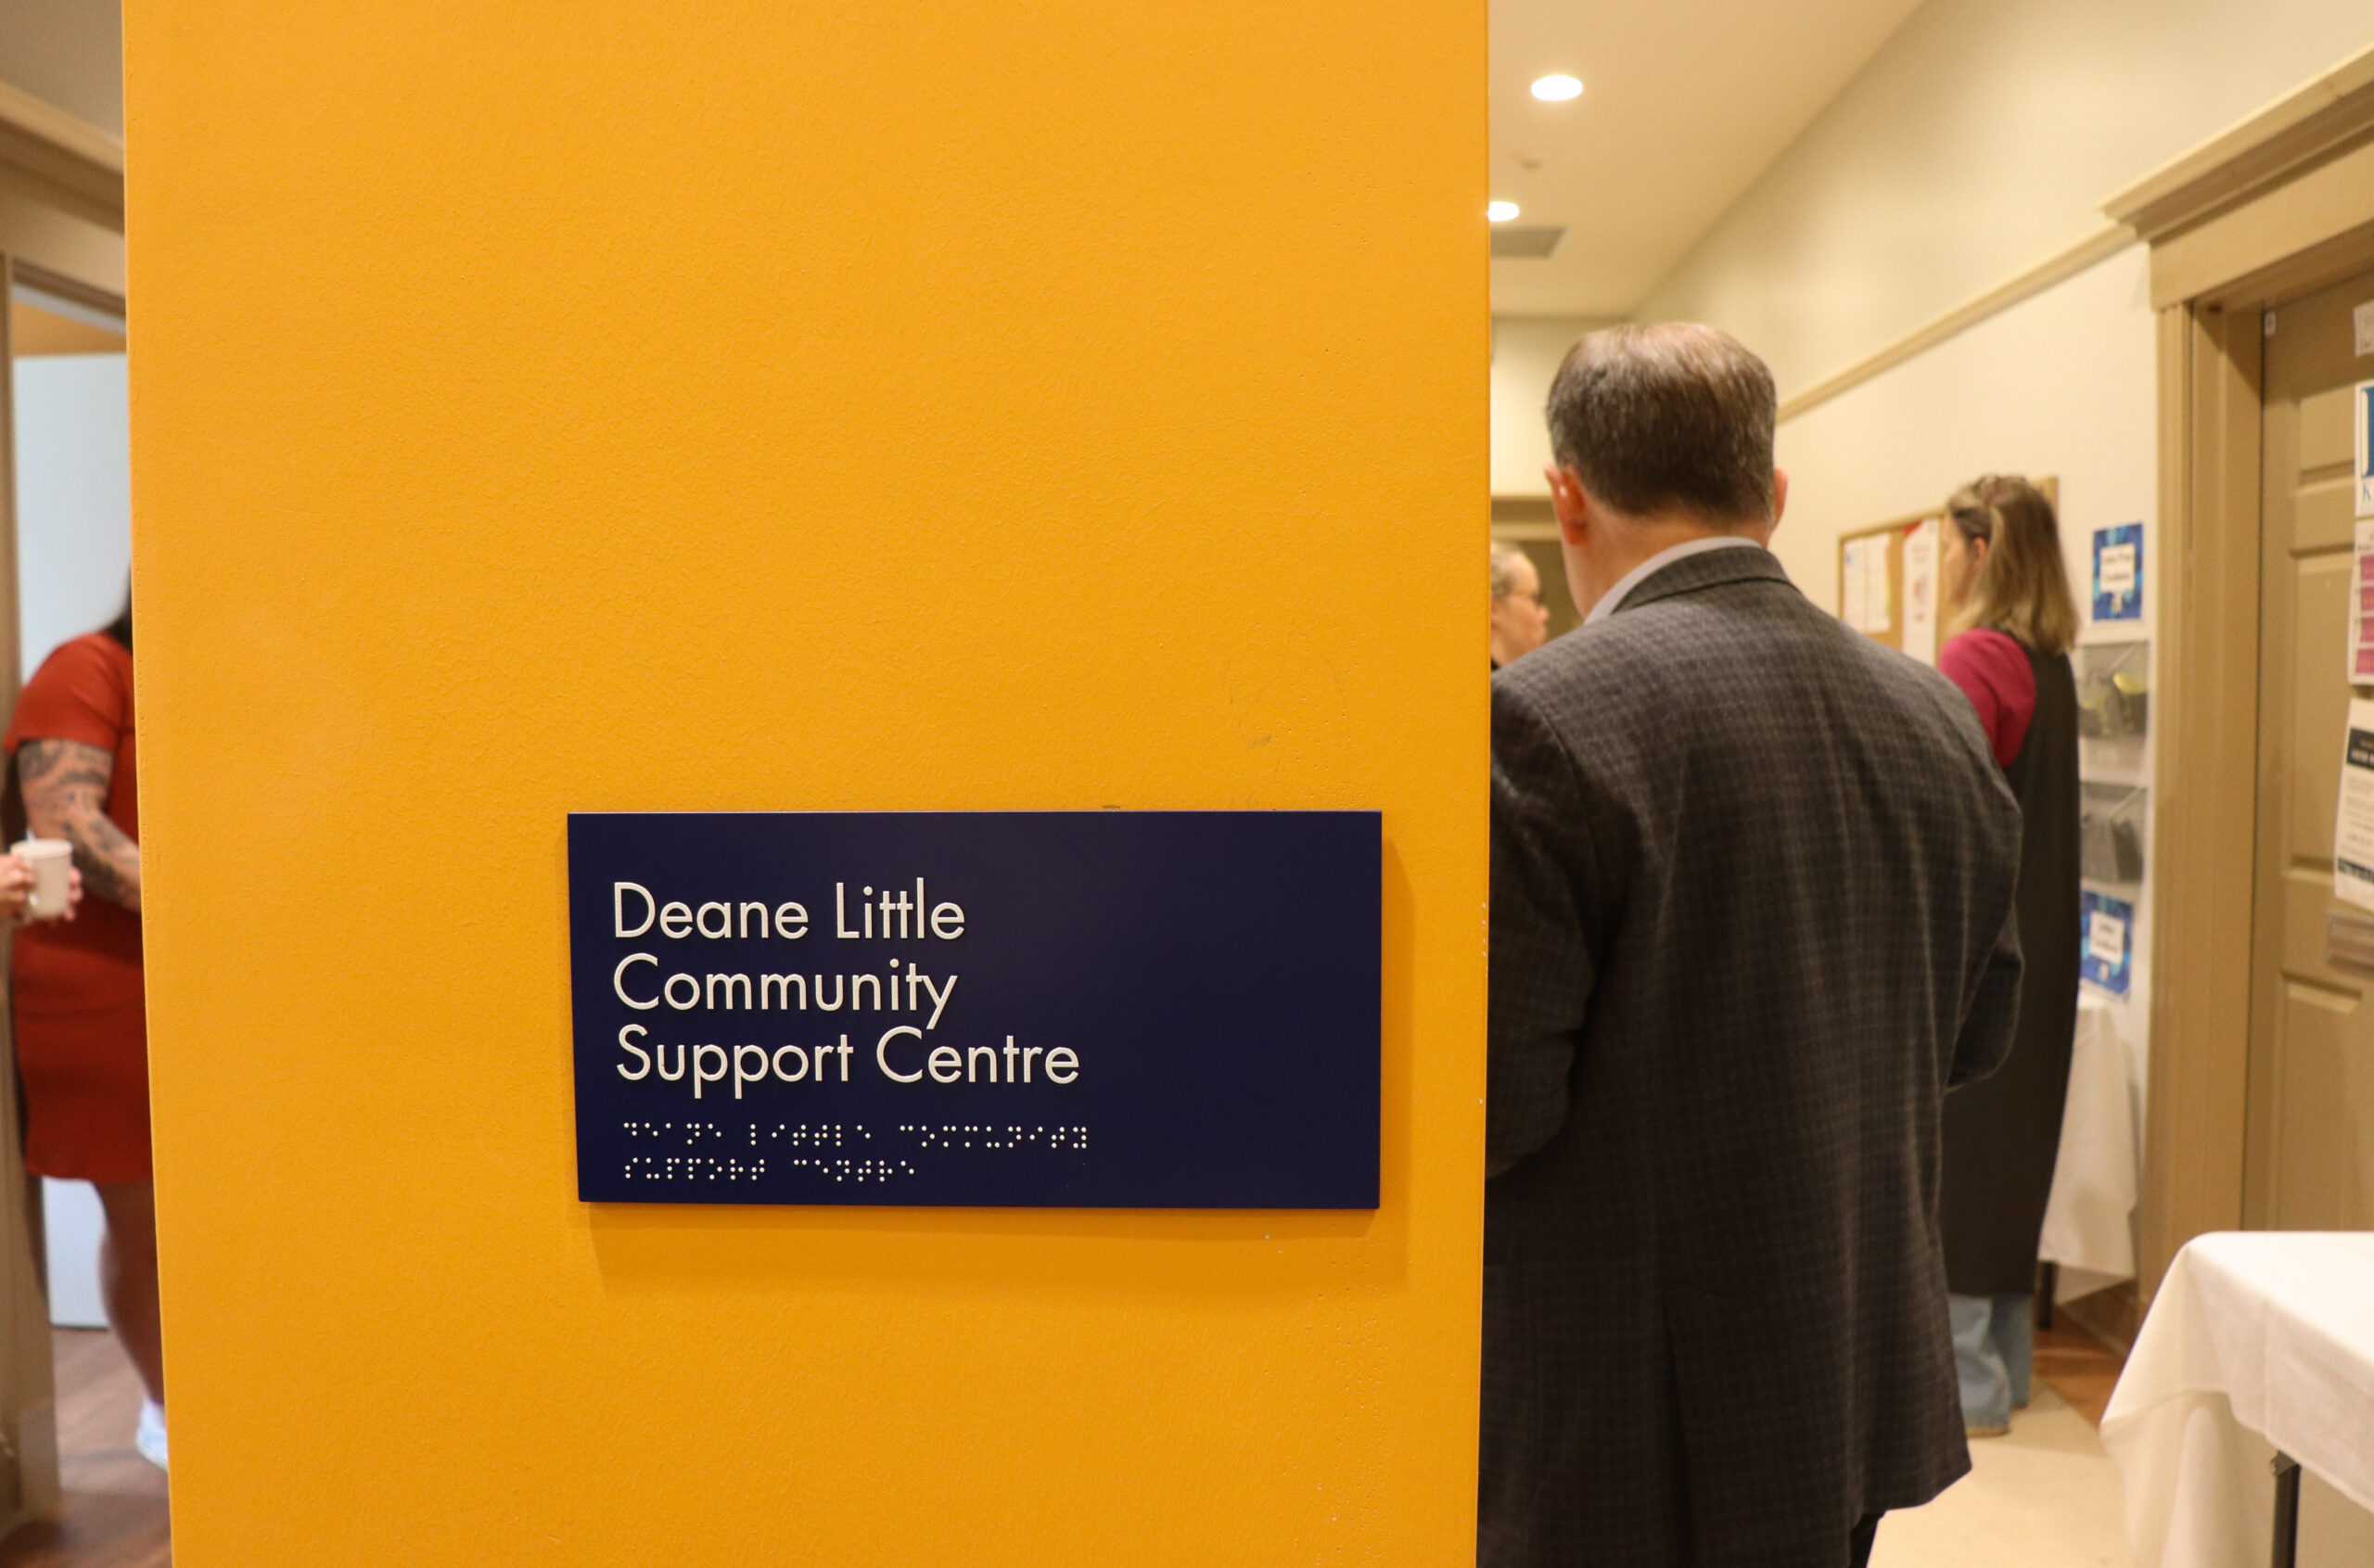 A sign on an orange wall reading "Deane Little Community Support Centre."